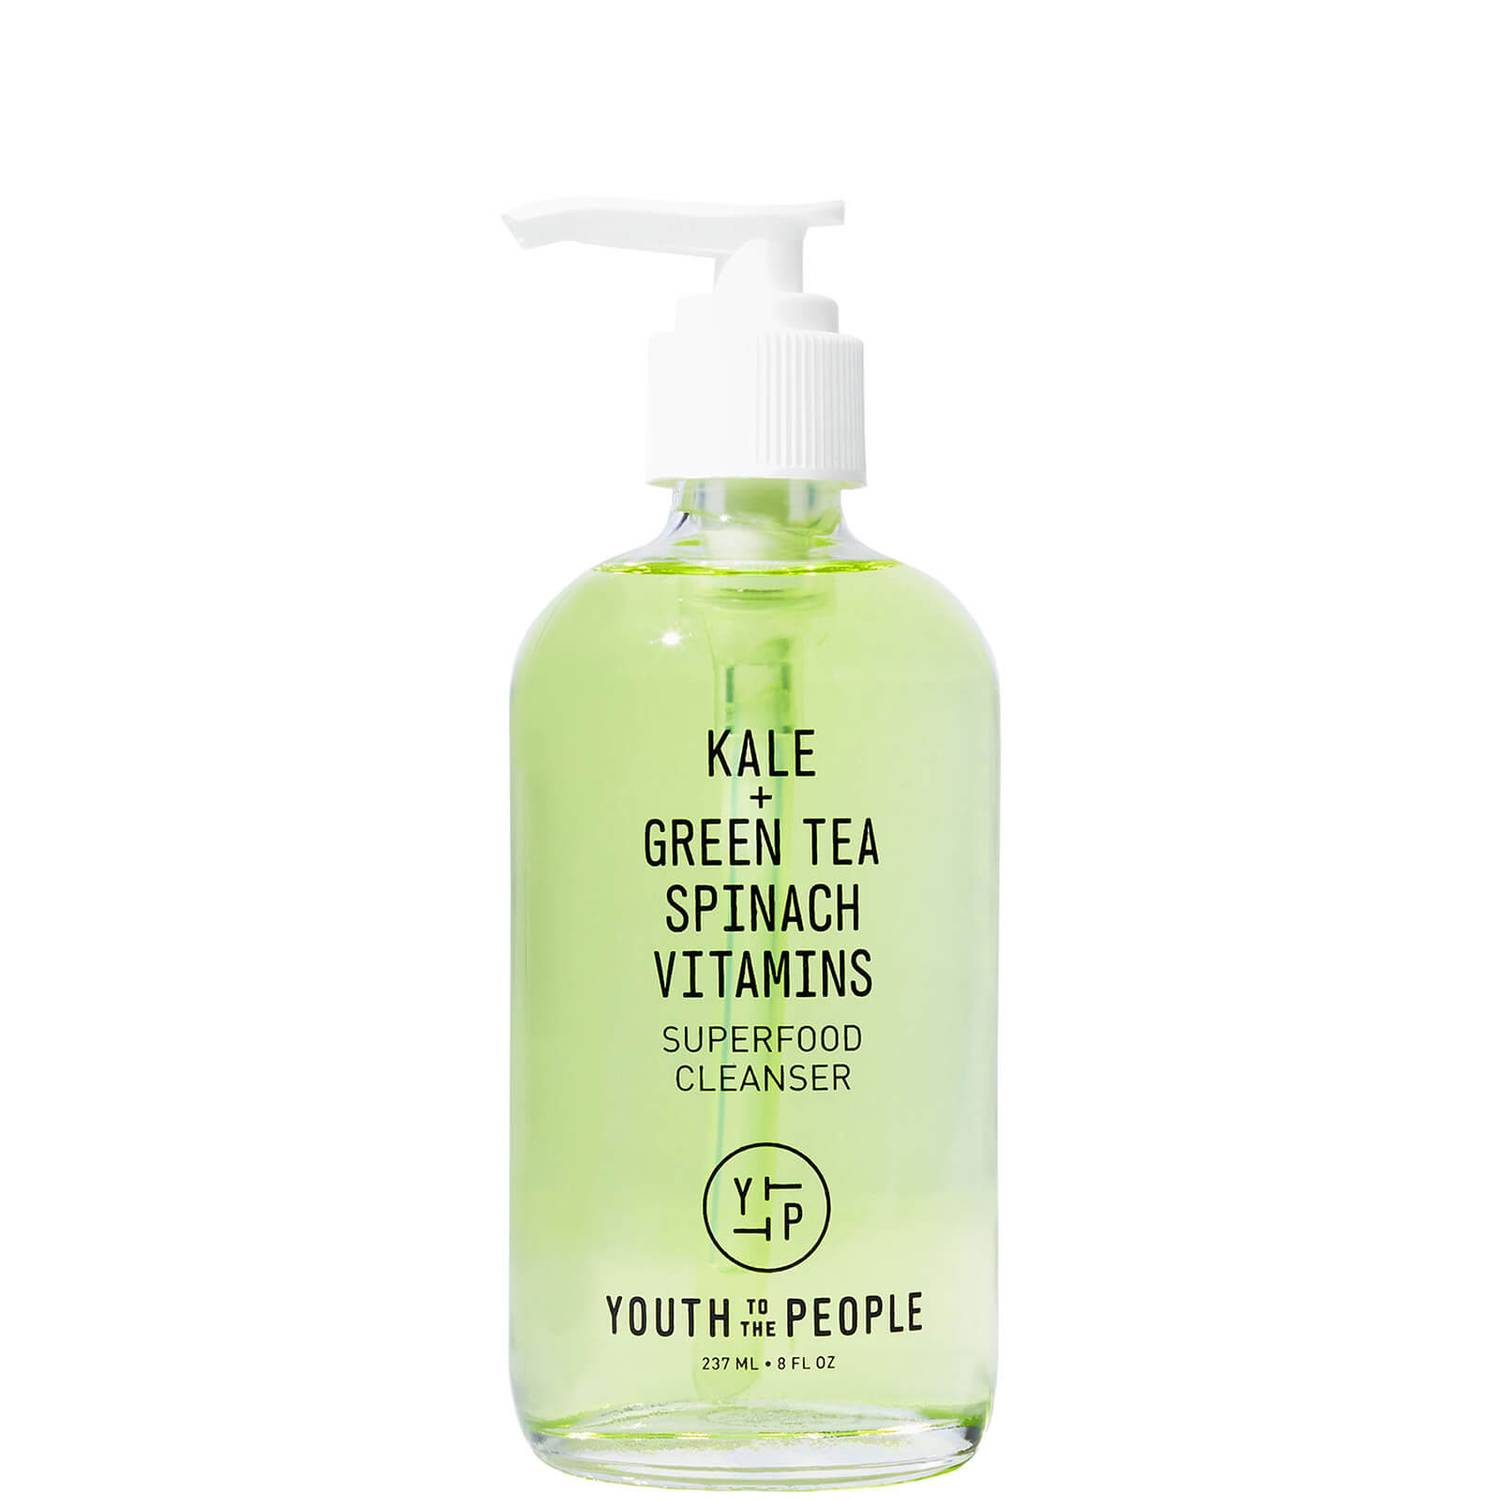 Youth To The People Superfood Cleanser antioxidant, skincare